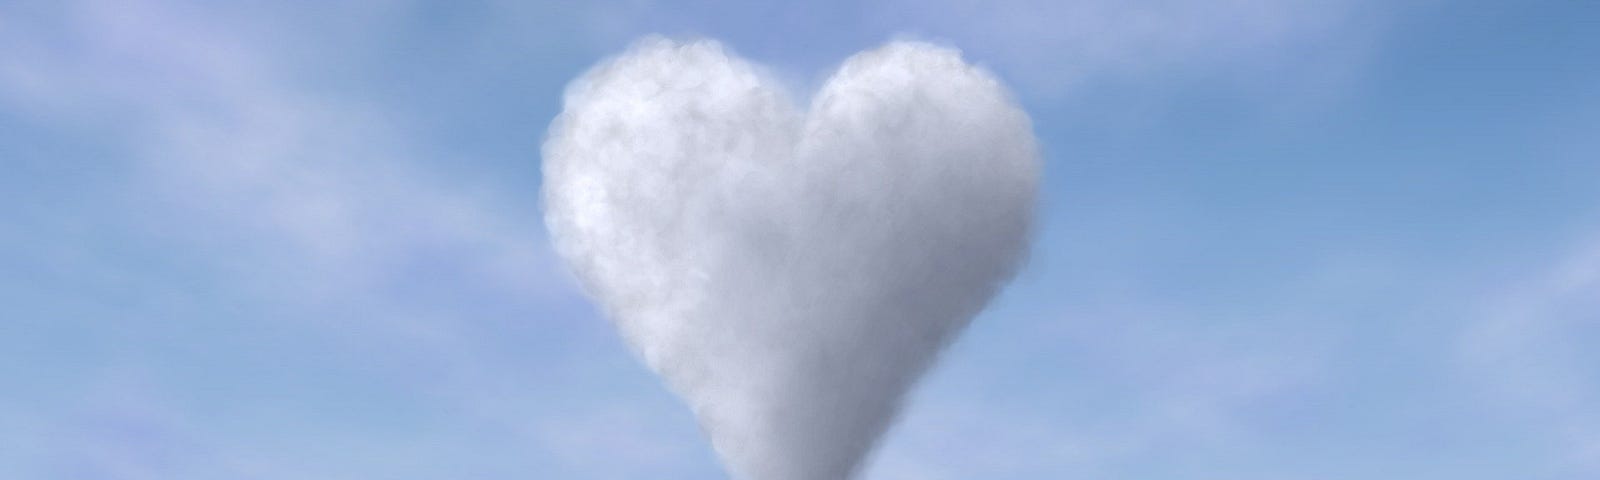 A white heart shaped cloud in a baby blue sky